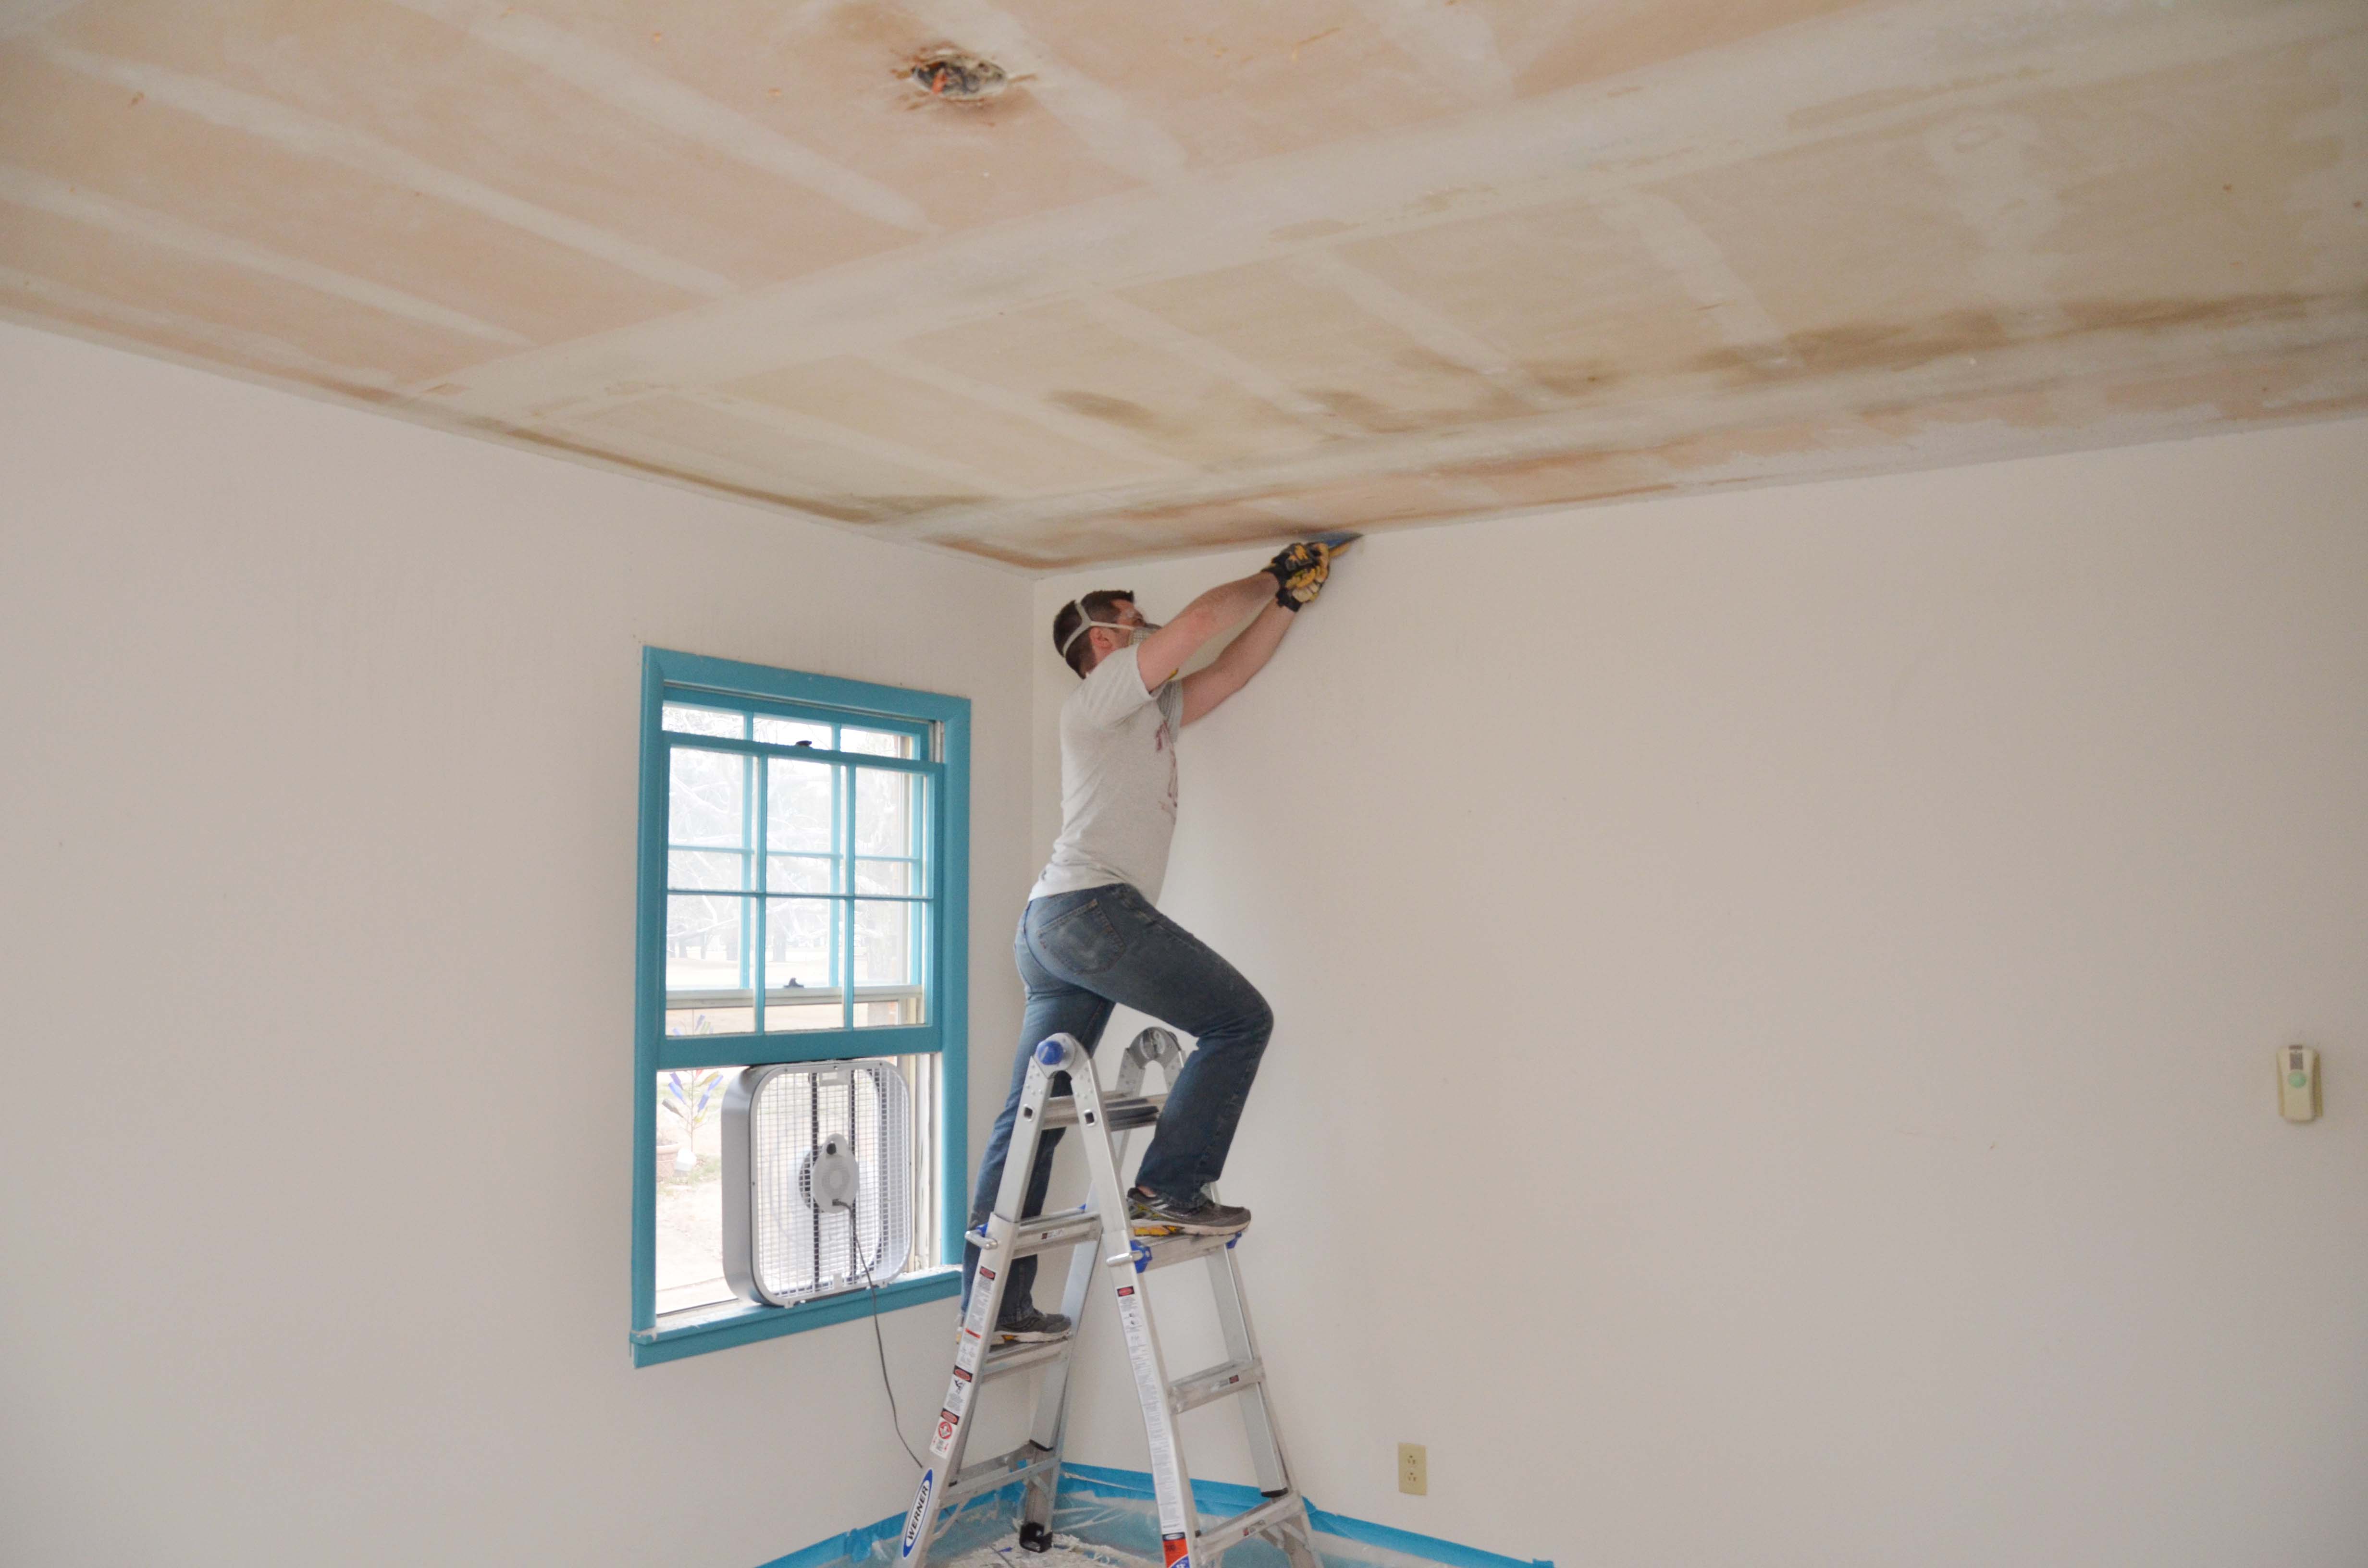 How To Scrape Painted Popcorn Ceilings And Baby Room Update